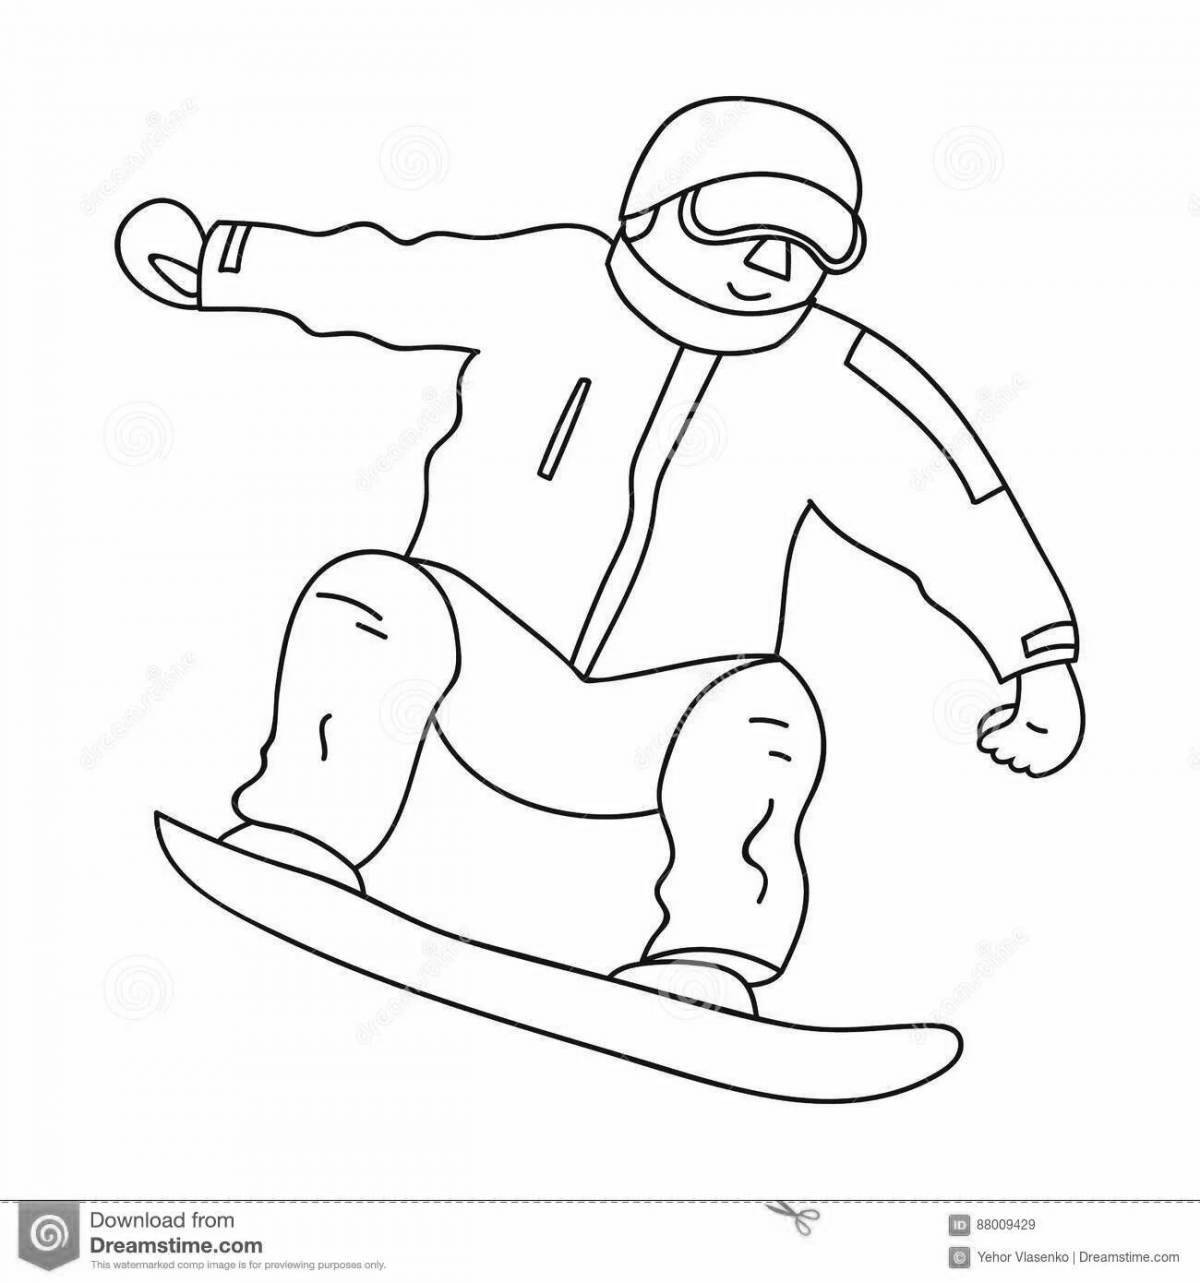 Amazing snowboarder coloring book for kids